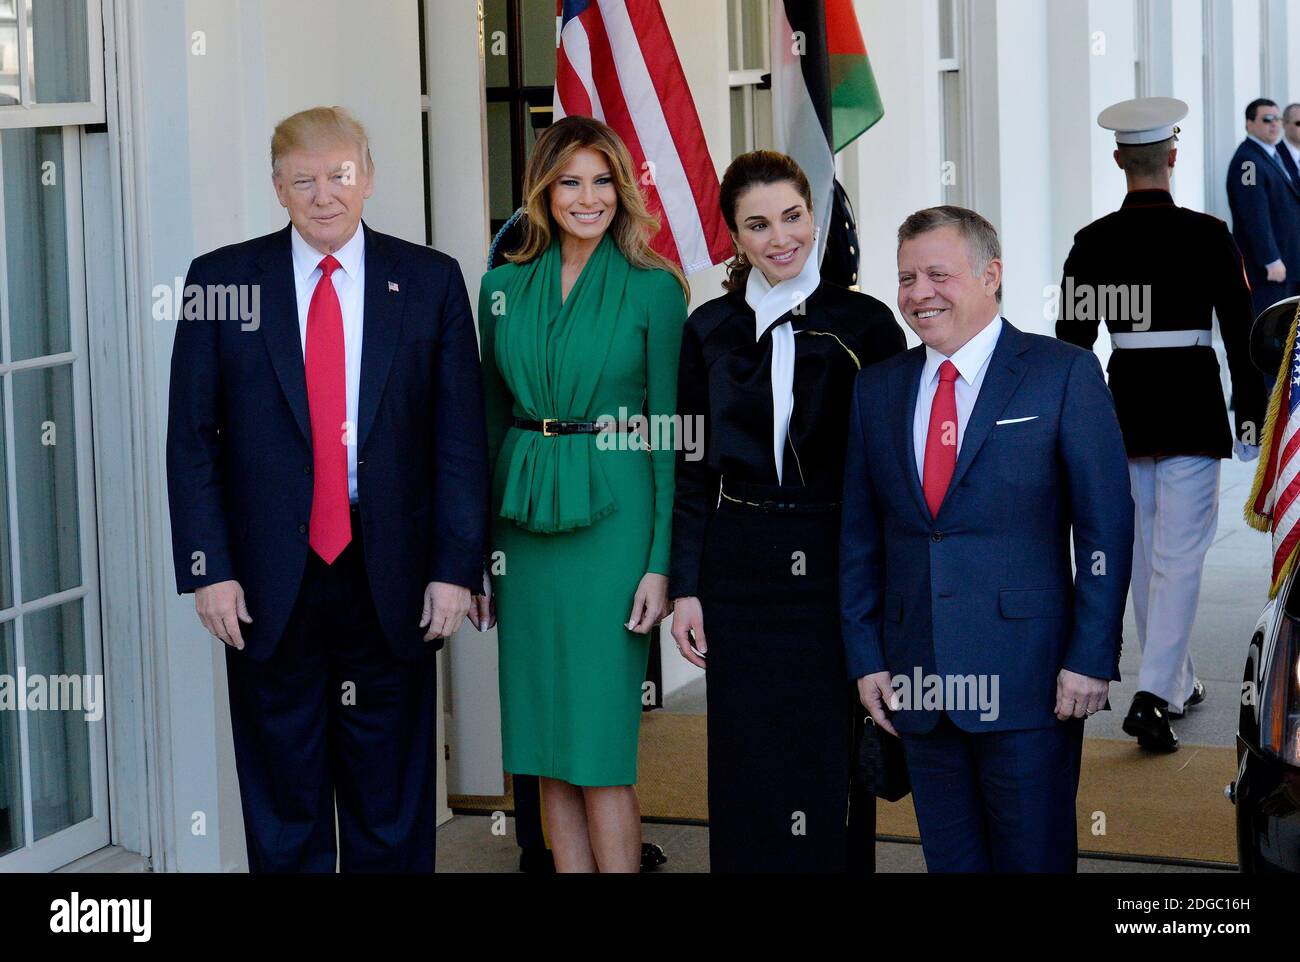 US President Donald Trump and the First Lady Melania Trump welcome King  Abdullah II and Queen Rania of Jordan at the West Wing of the White House  in Washington, DC, April 5,